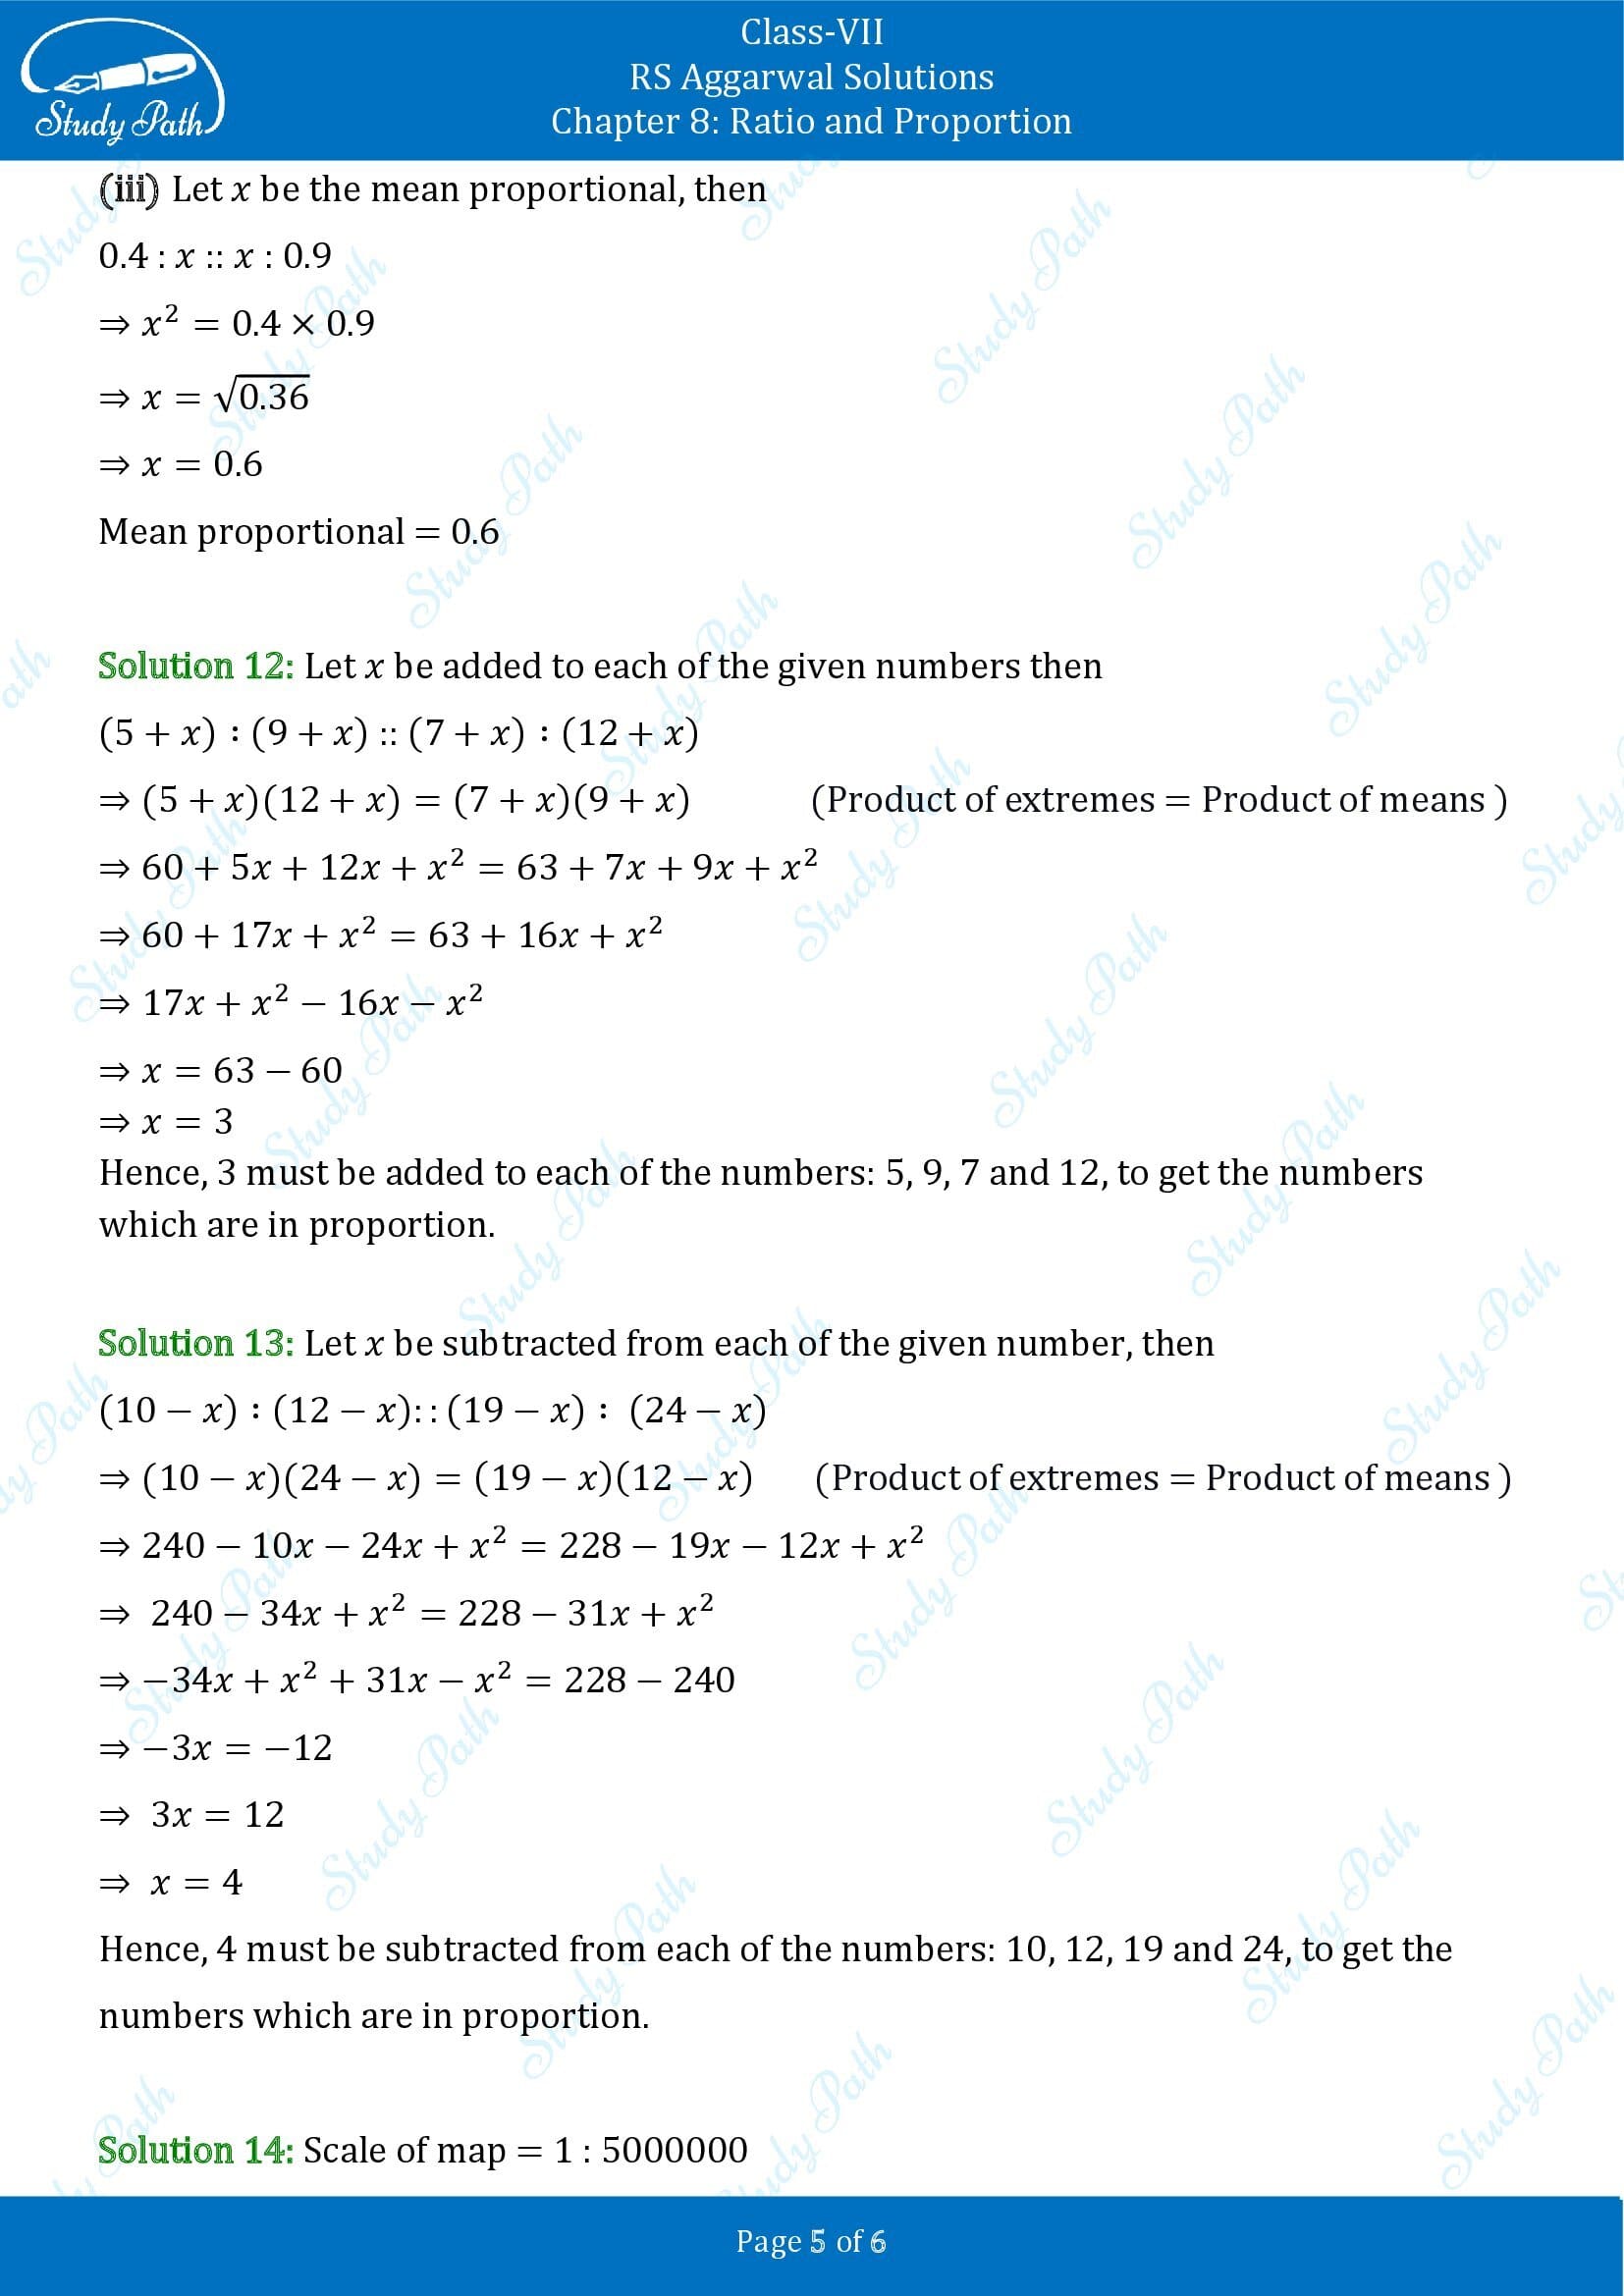 RS Aggarwal Solutions Class 7 Chapter 8 Ratio and Proportion Exercise 8B 00005